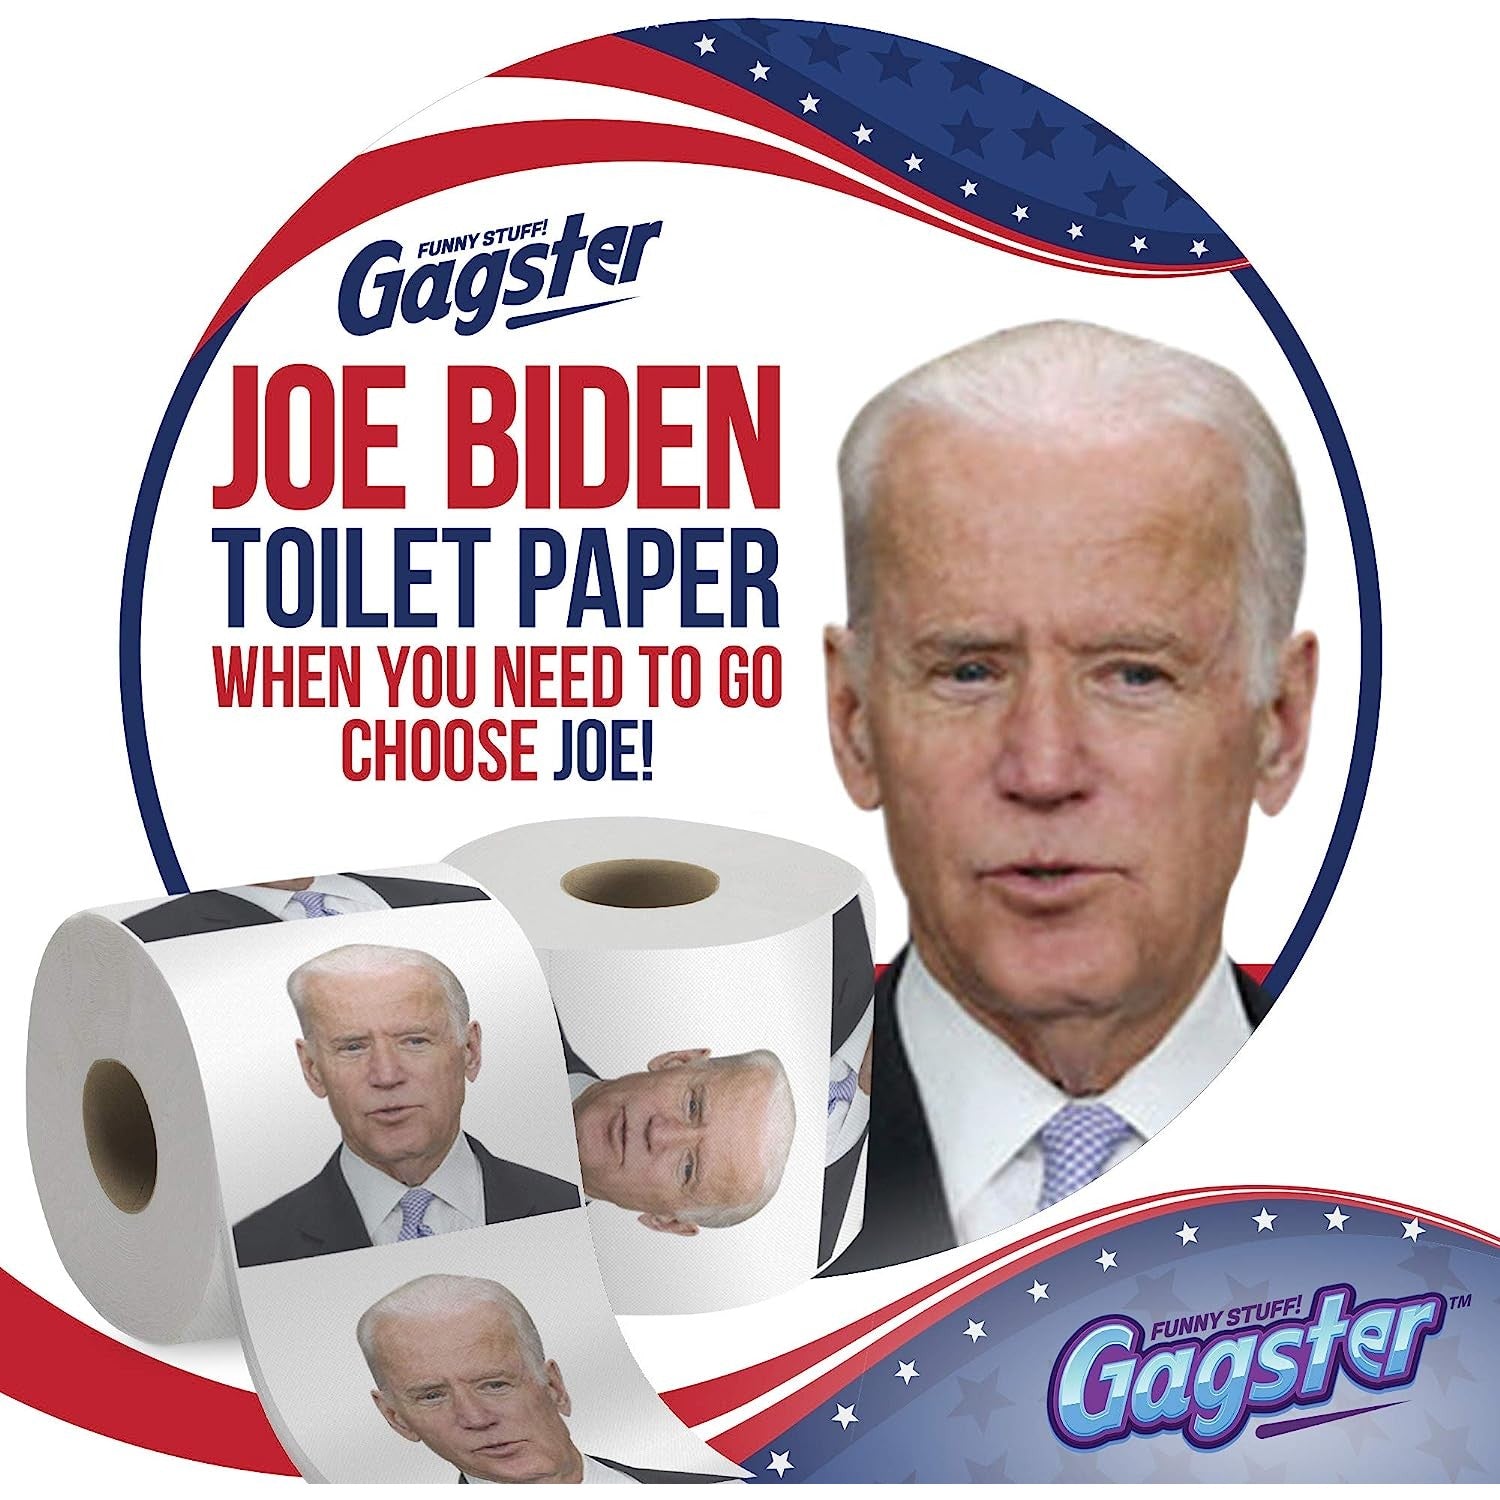 Two rolls of toilet paper with Joe Biden's face printed on it.